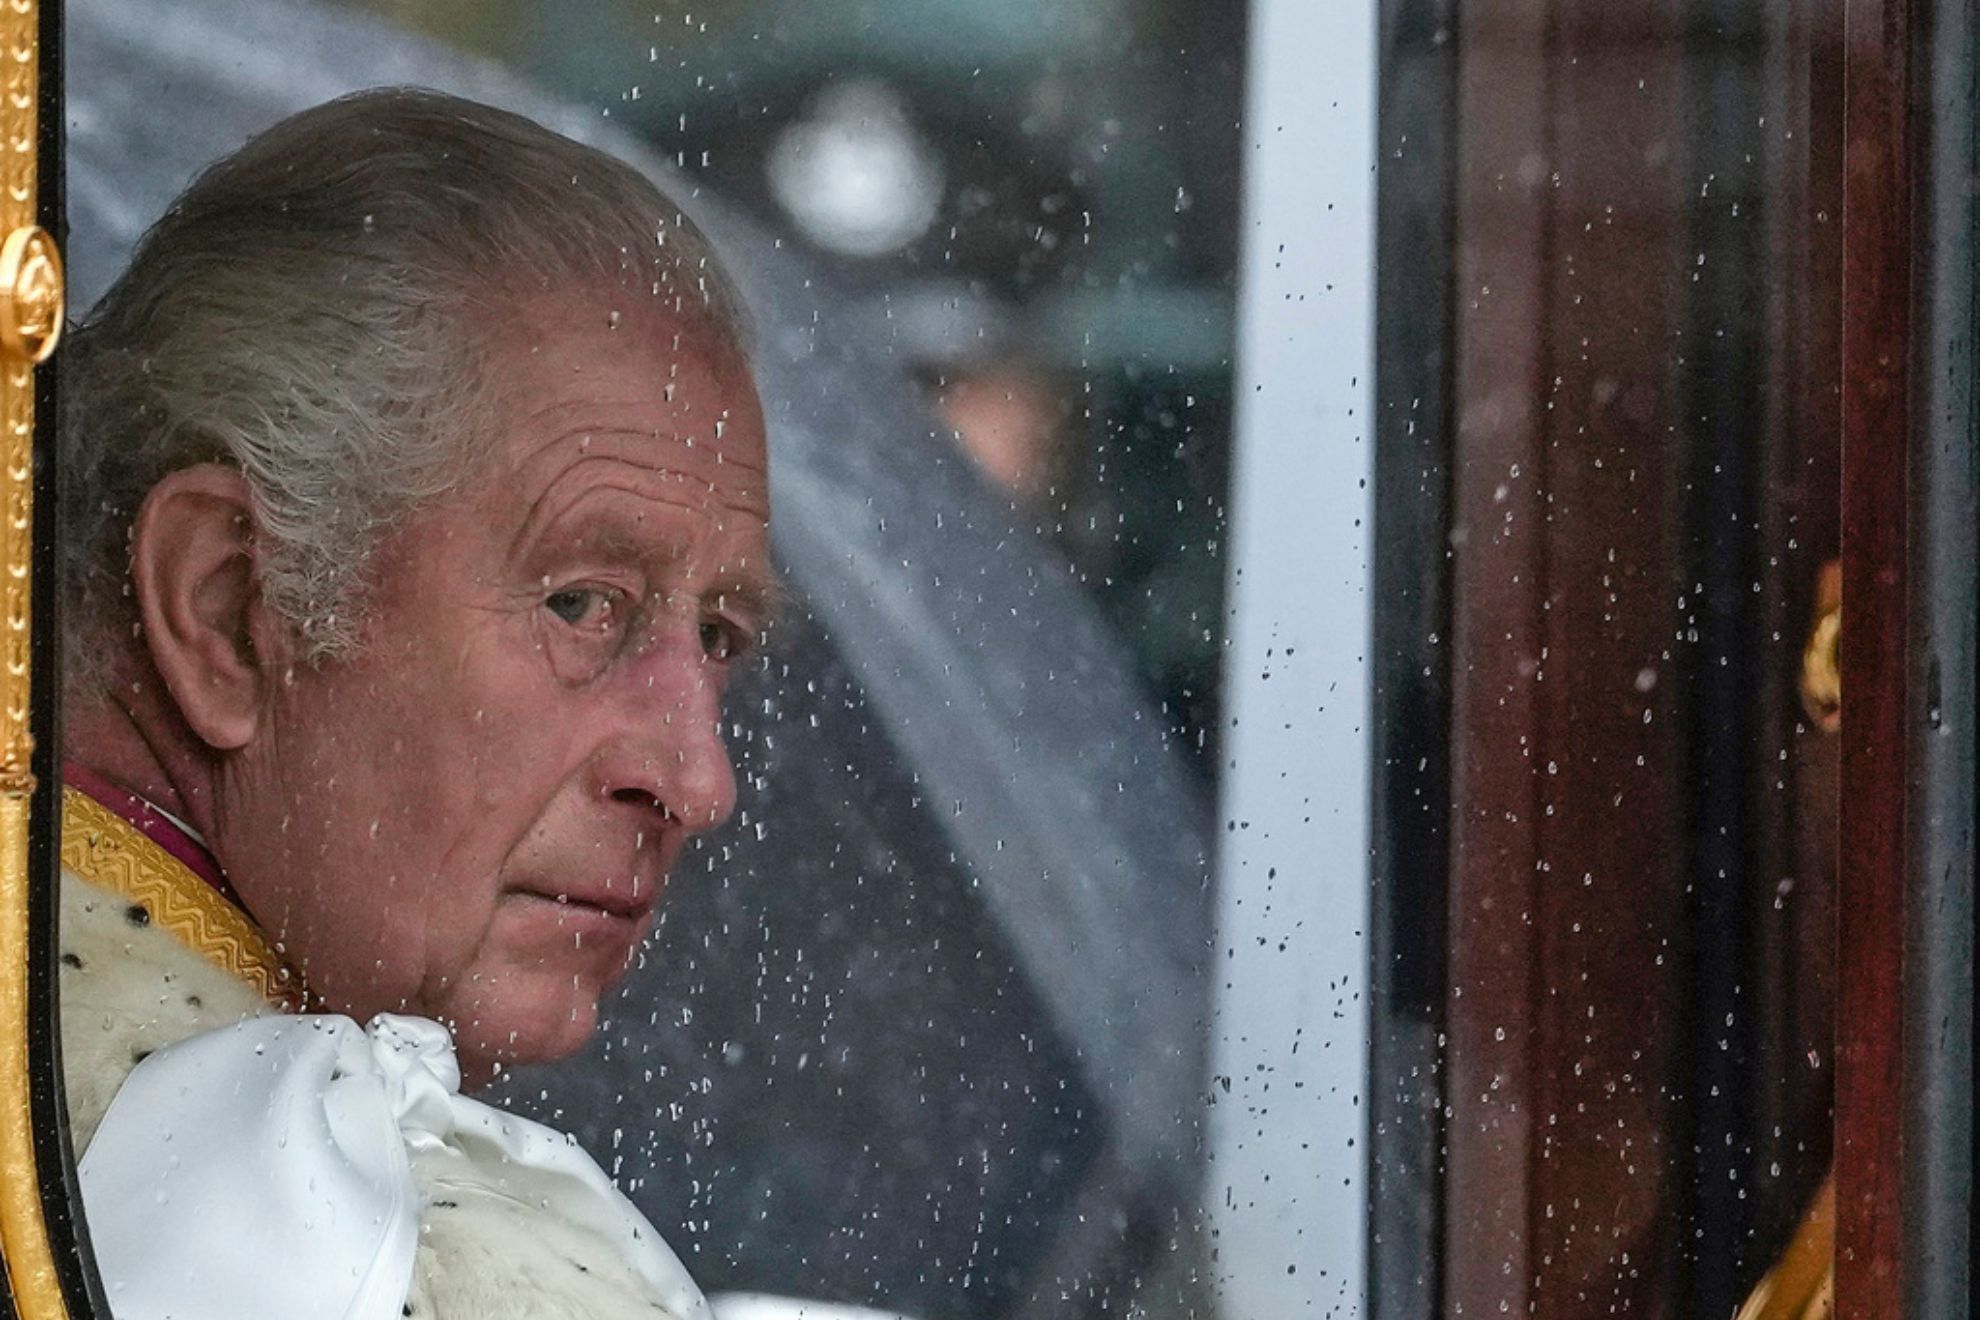 A year after the death of Queen Elizabeth II triggered questions about the future of the British monarchy, King Charles III's reign has been marked more by continuity than transformation, by changes in style rather than substance.